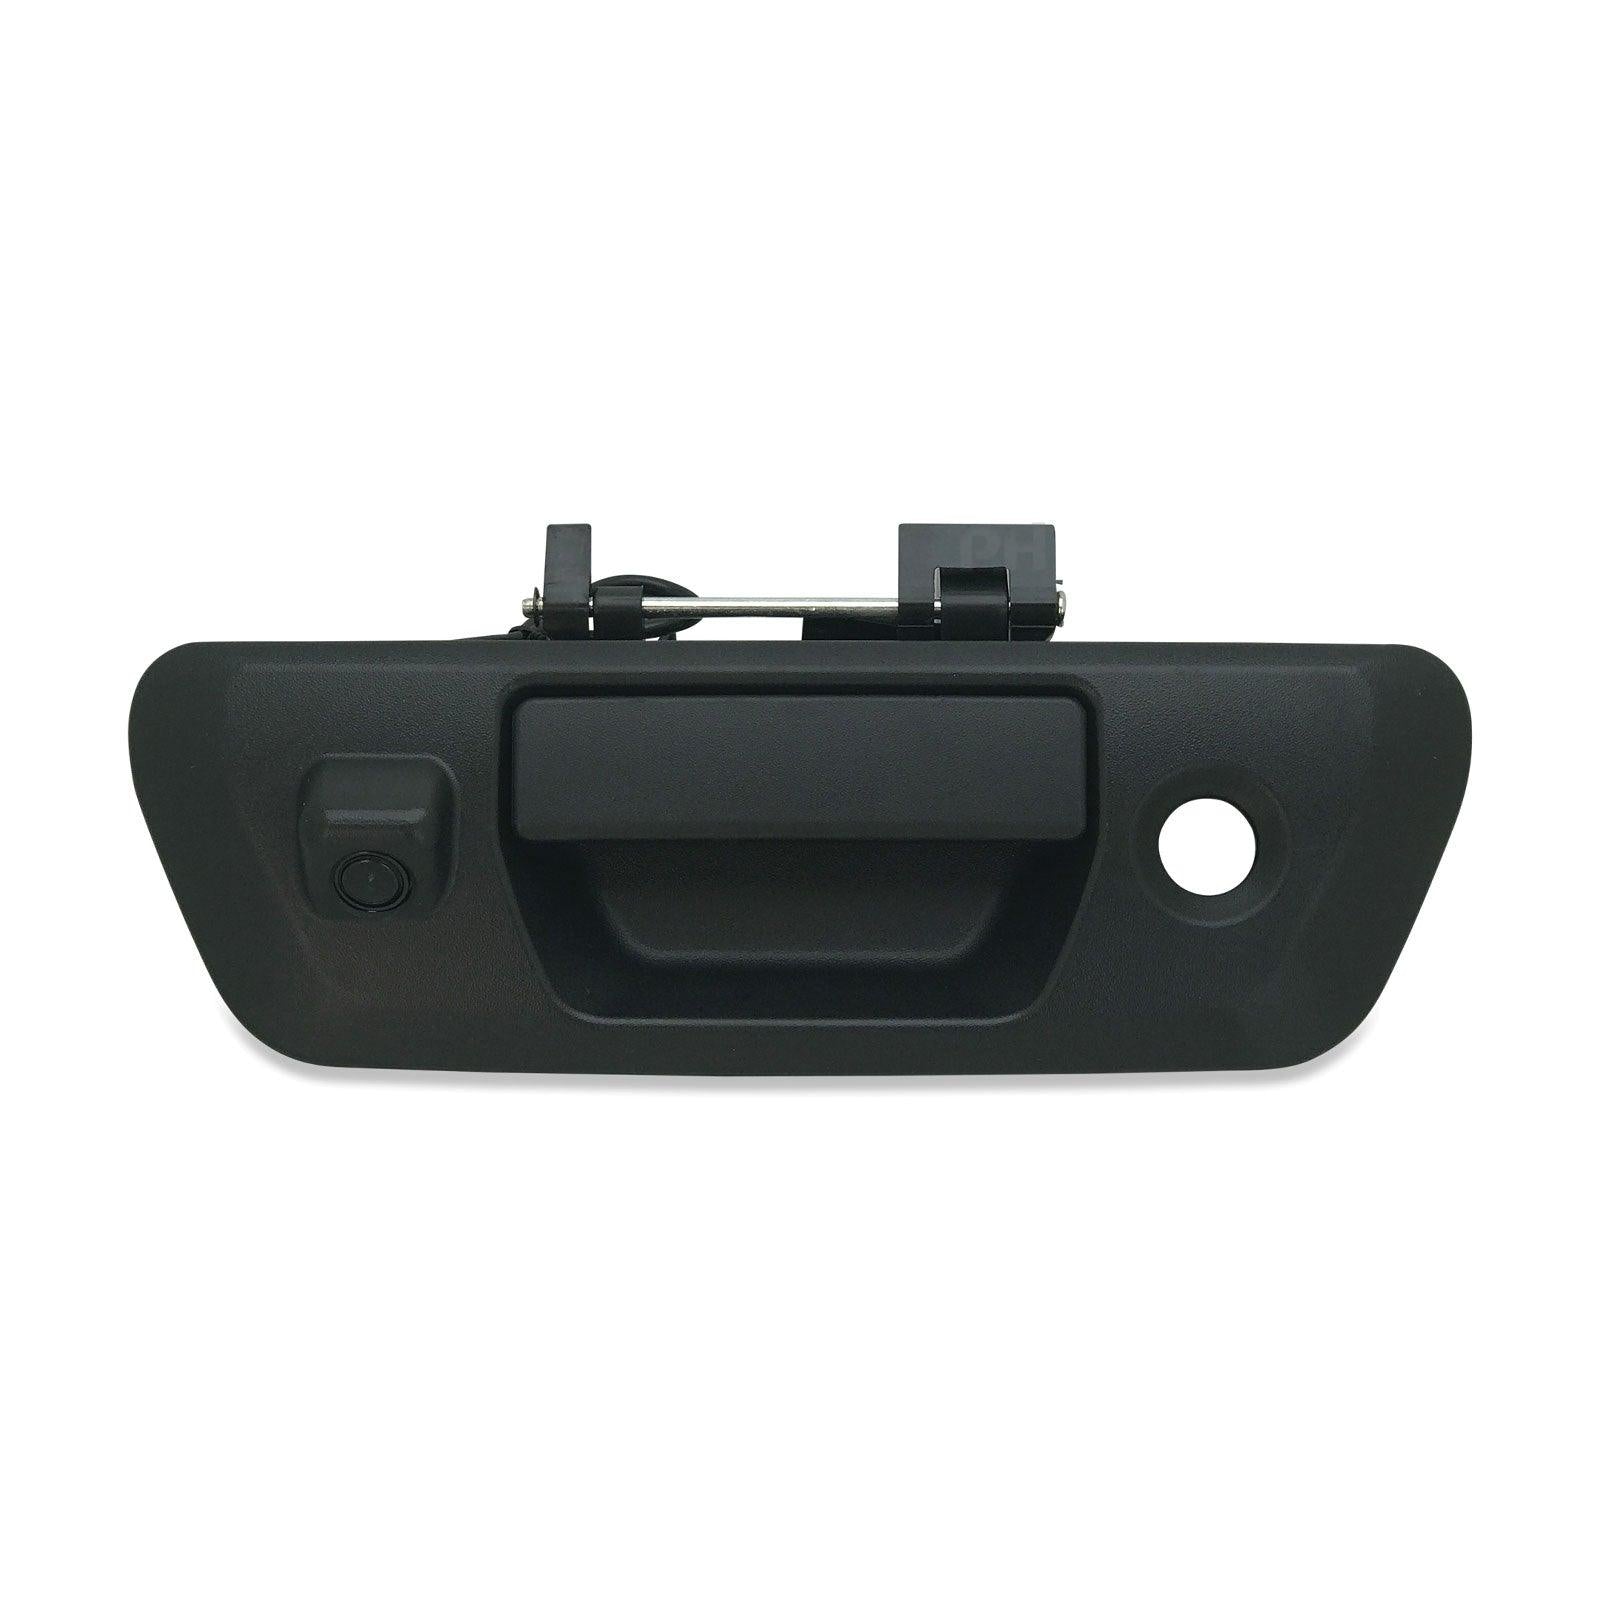 Panel House - Tailgate Handle BLACK with Reverse Camera fits Nissan Navara NP300 D23 - 4X4OC™ | 4x4 Offroad Centre